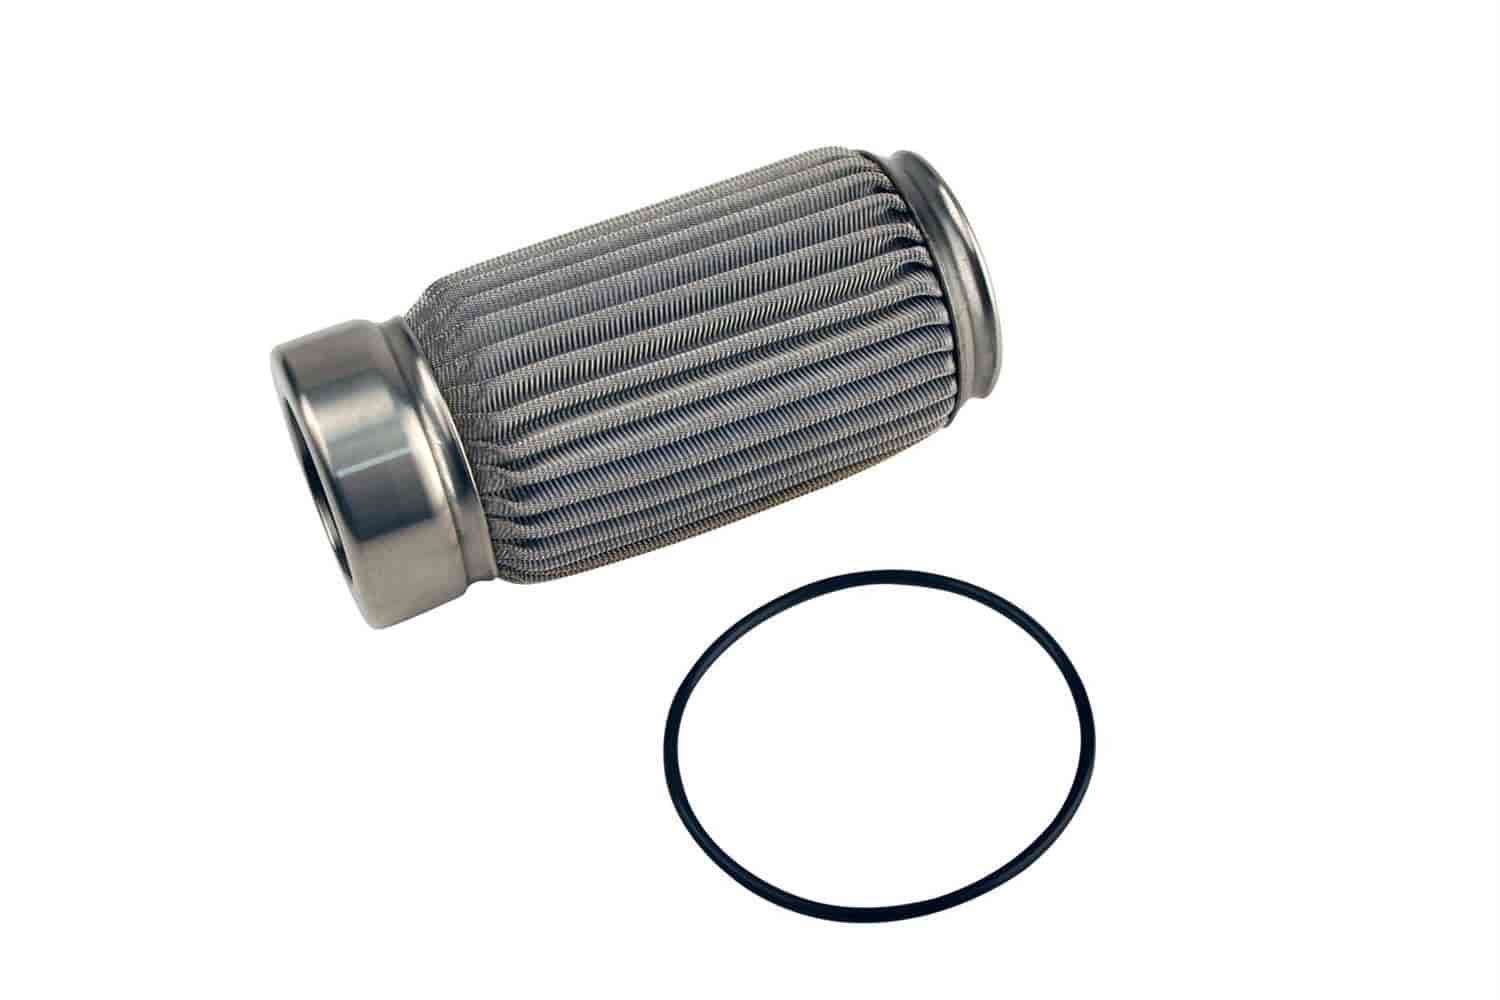 Replacement Element Crimp Construction 100-m Stainless Mesh Retro Fits All 2 OD Filter Housings For All Fuel Types